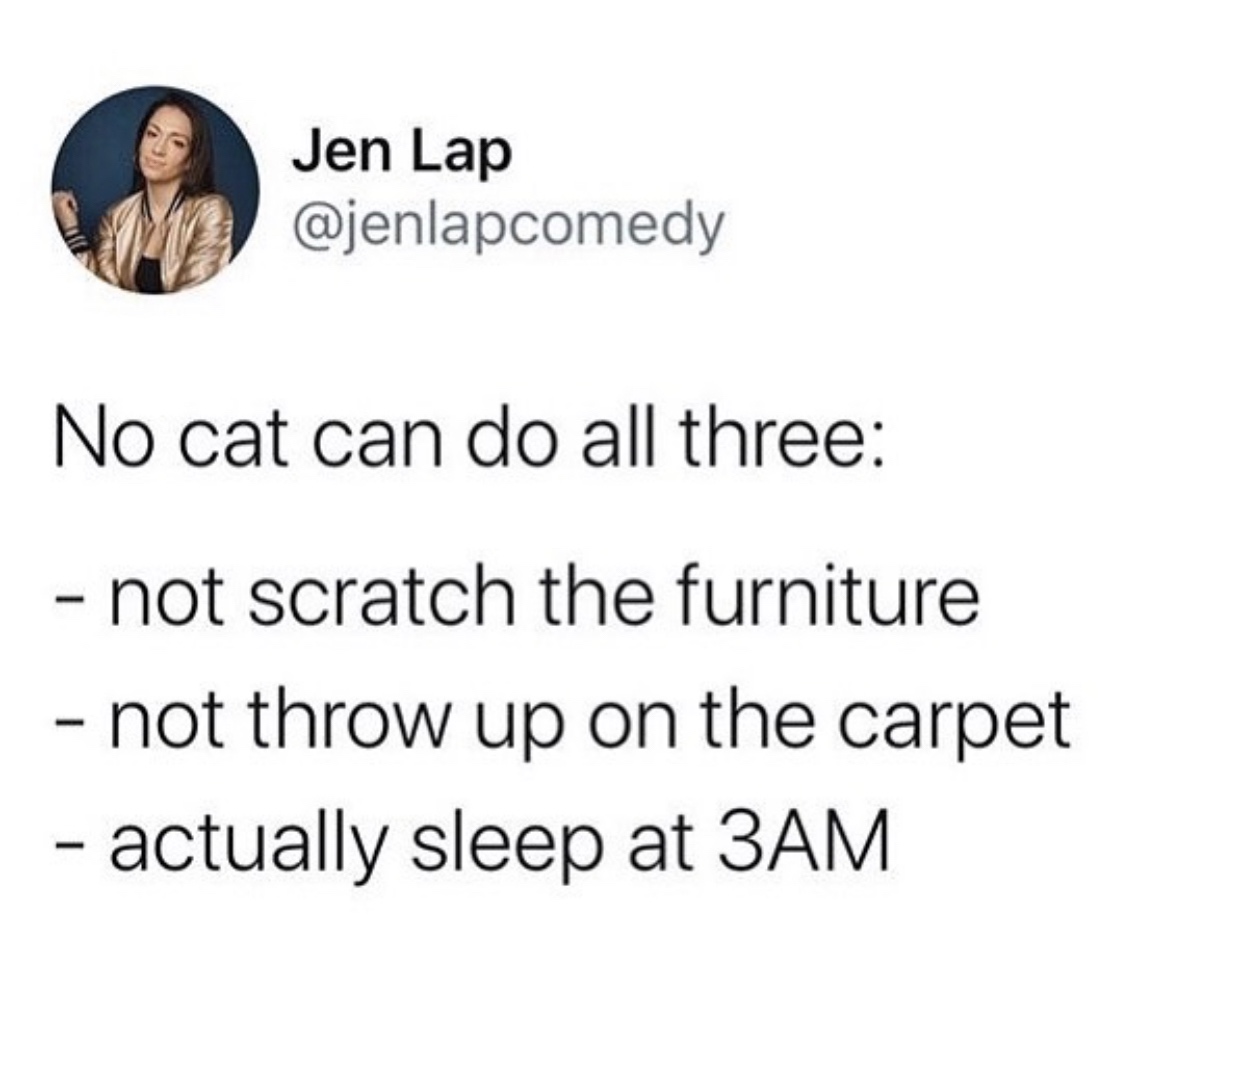 cute but will fight - Jen Lap No cat can do all three not scratch the furniture not throw up on the carpet actually sleep at 3AM